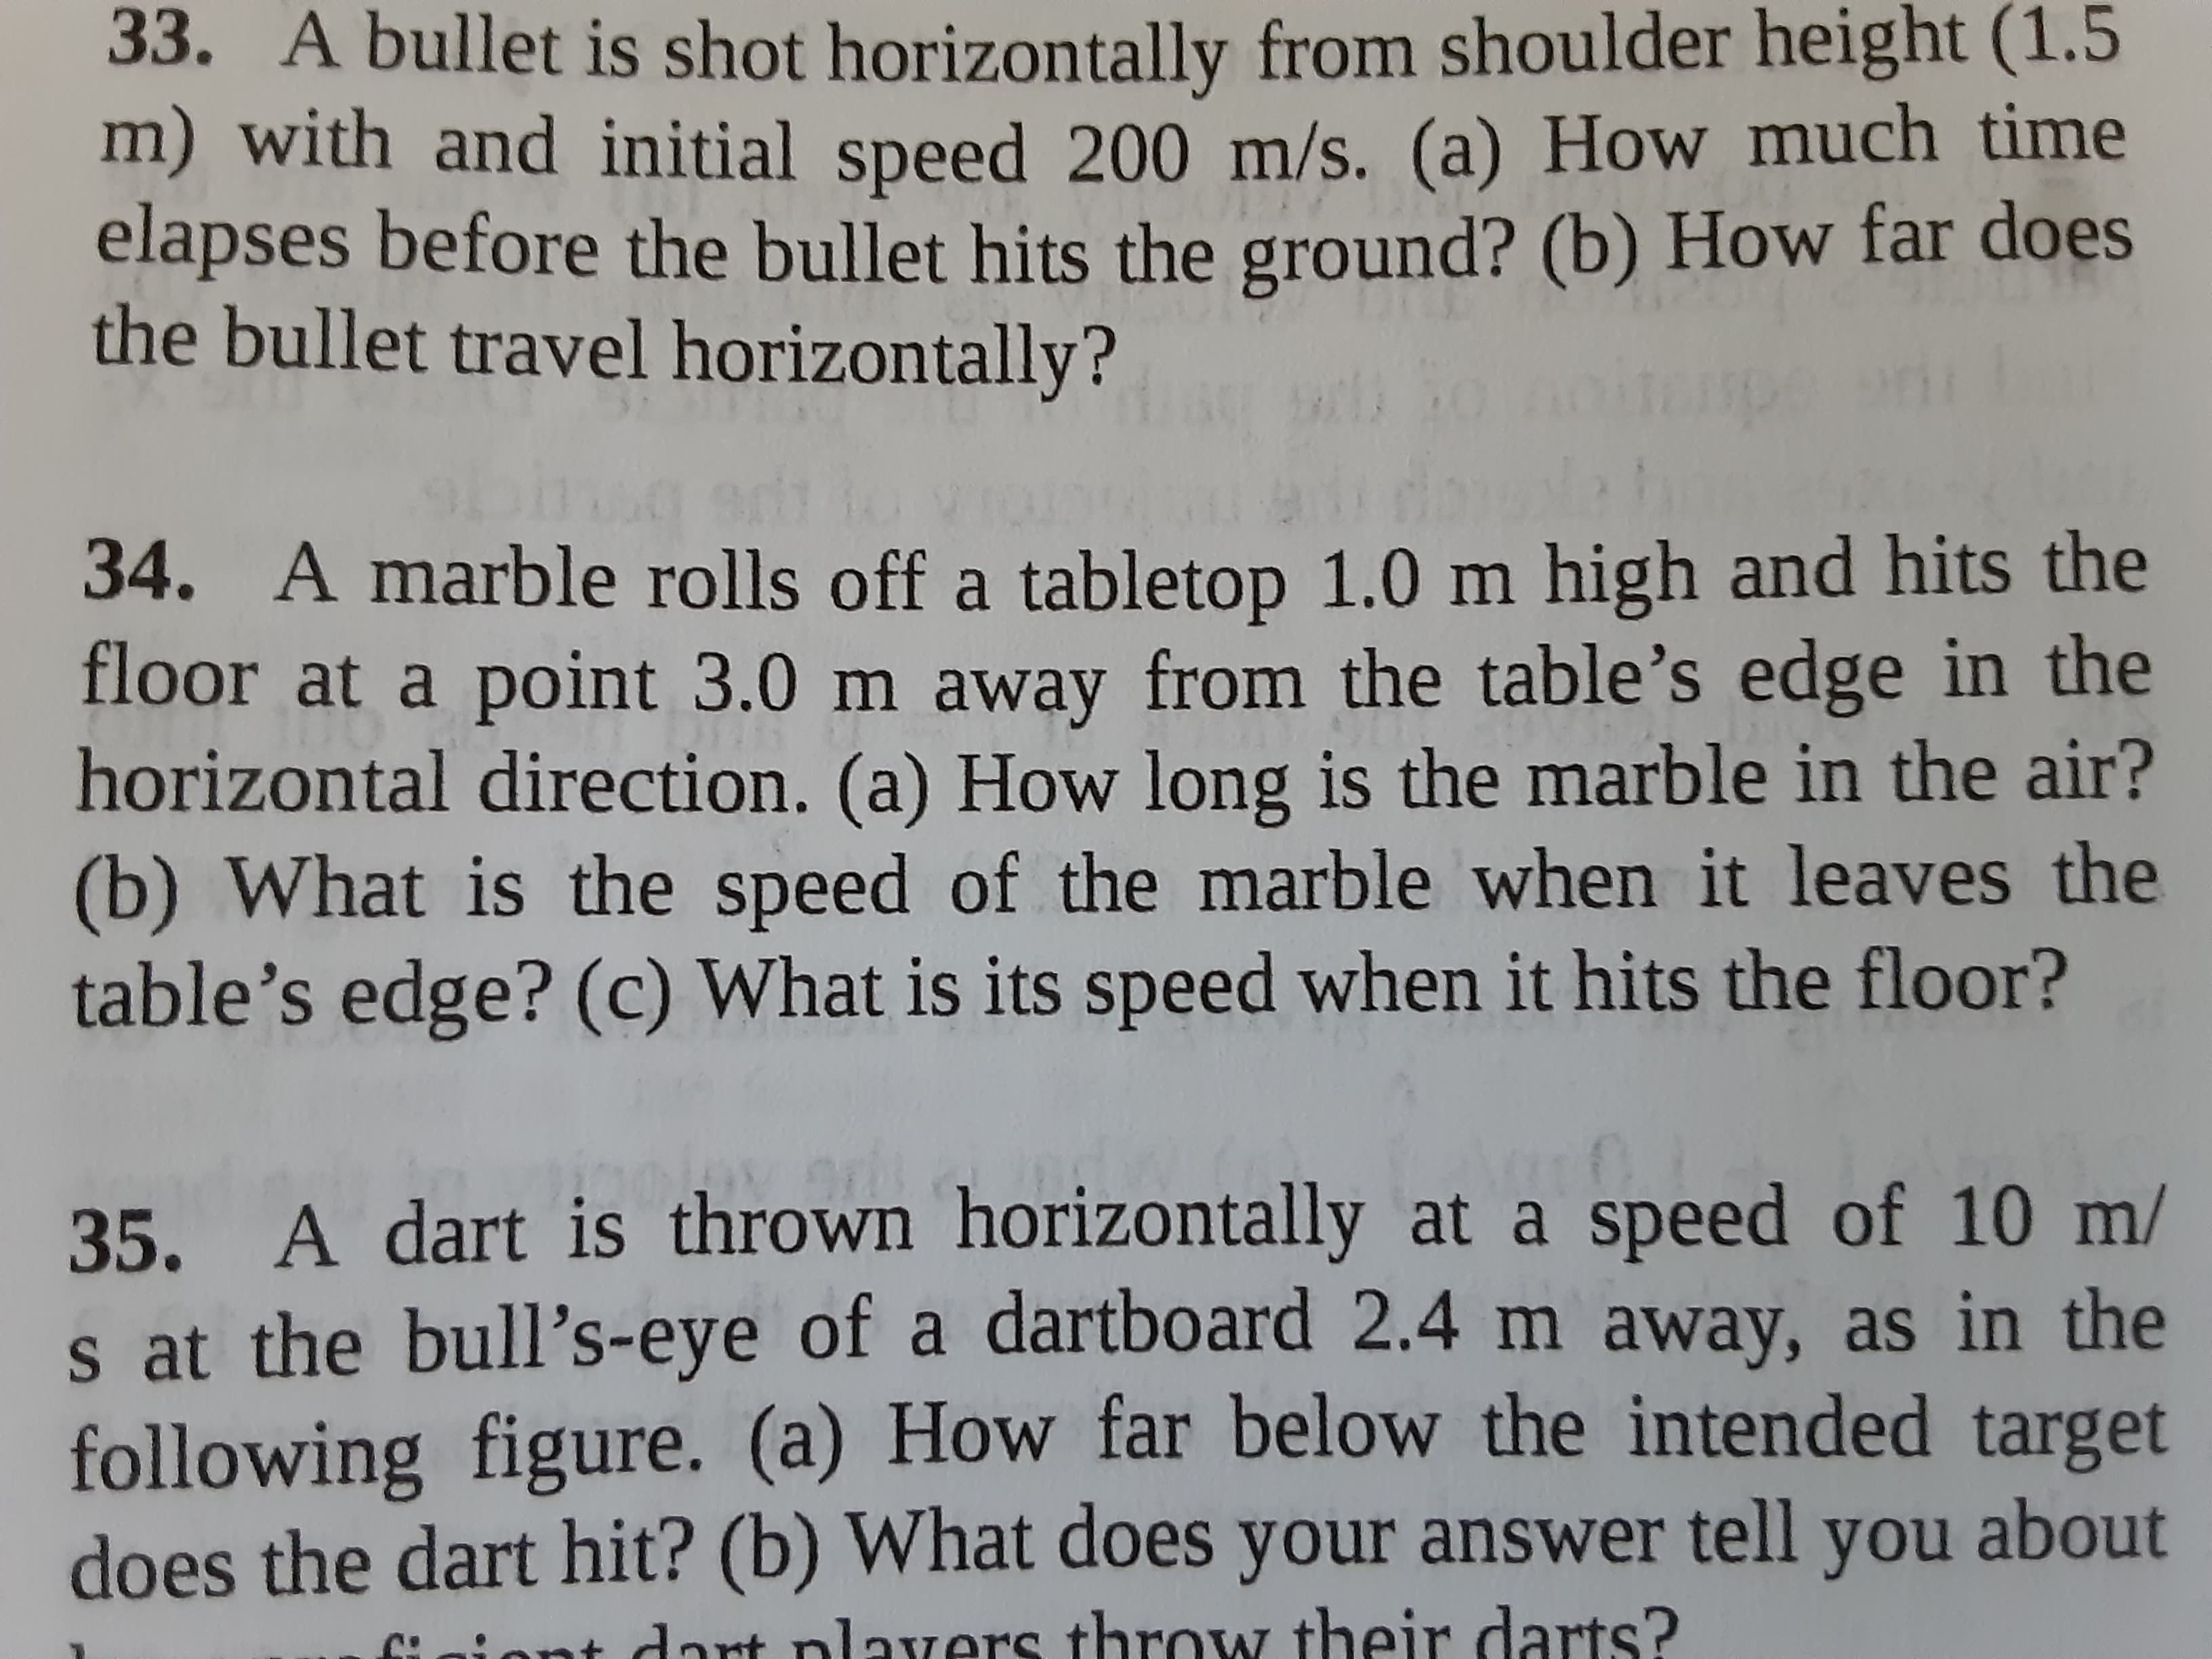 34. A marble rolls off a tabletop 1.0 m high and hits the
floor at a point 3.0 m away from the table's edge in the
horizontal direction. (a) How long is the marble in the air?
(b) What is the speed of the marble when it leaves the
table's edge? (c) What is its speed when it hits the floor?
